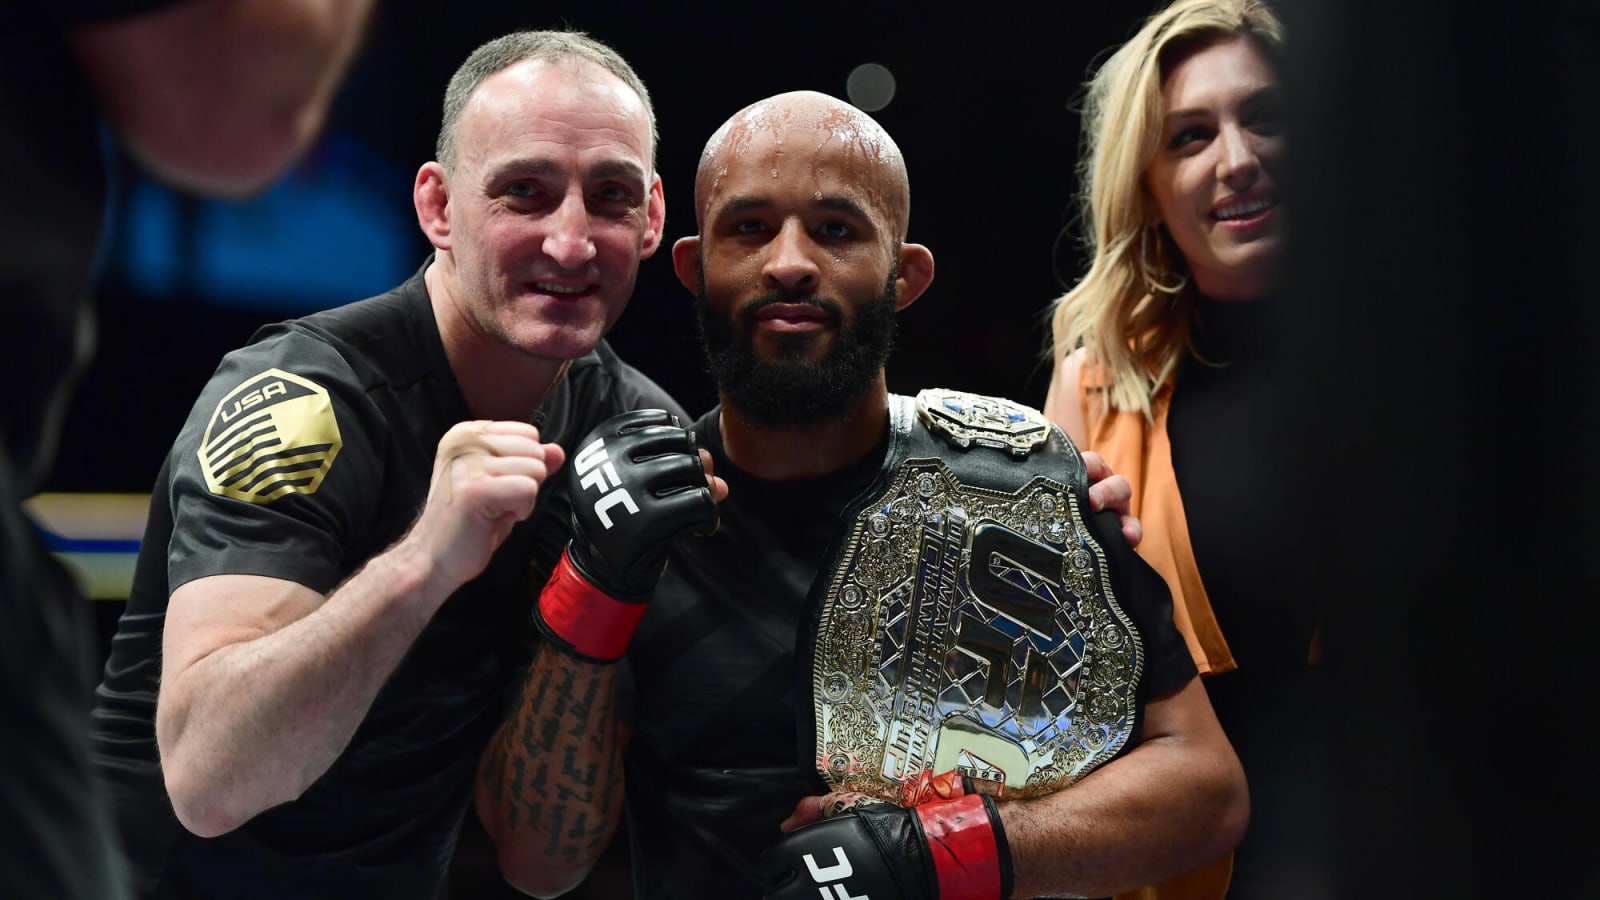 By The Numbers: Demetrious Johnson vs. Adriano Moraes